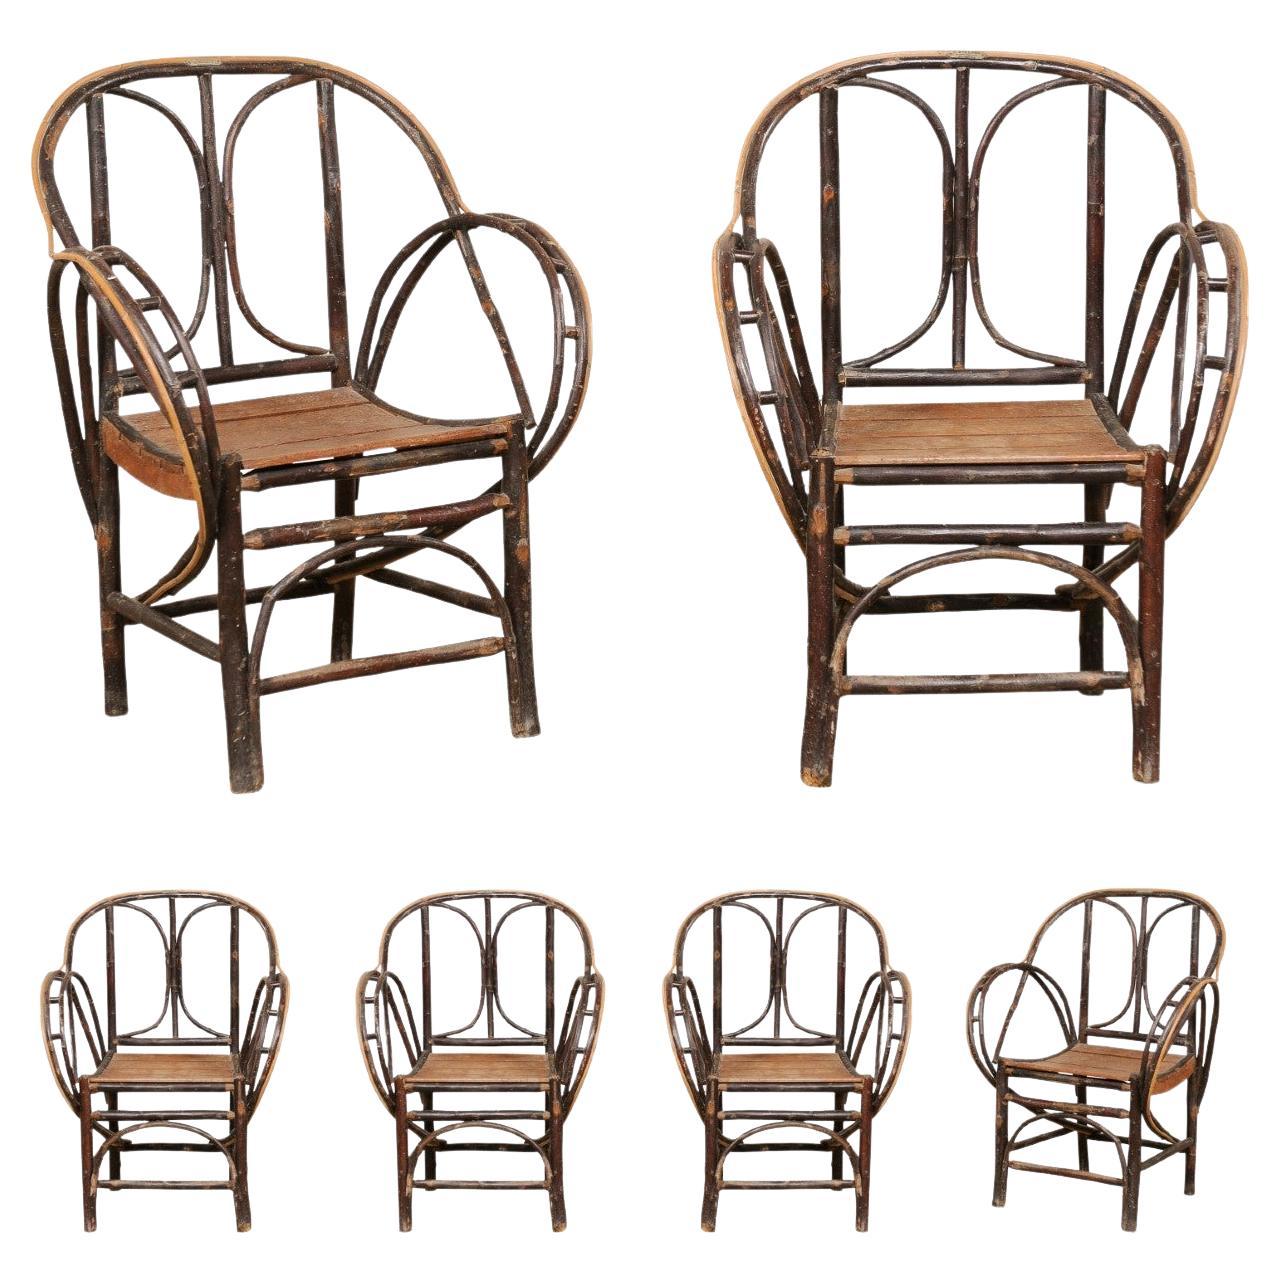 Spanish Set of Six Barcelona Café Curvaceous Bent-Wood Patio Dining Chairs